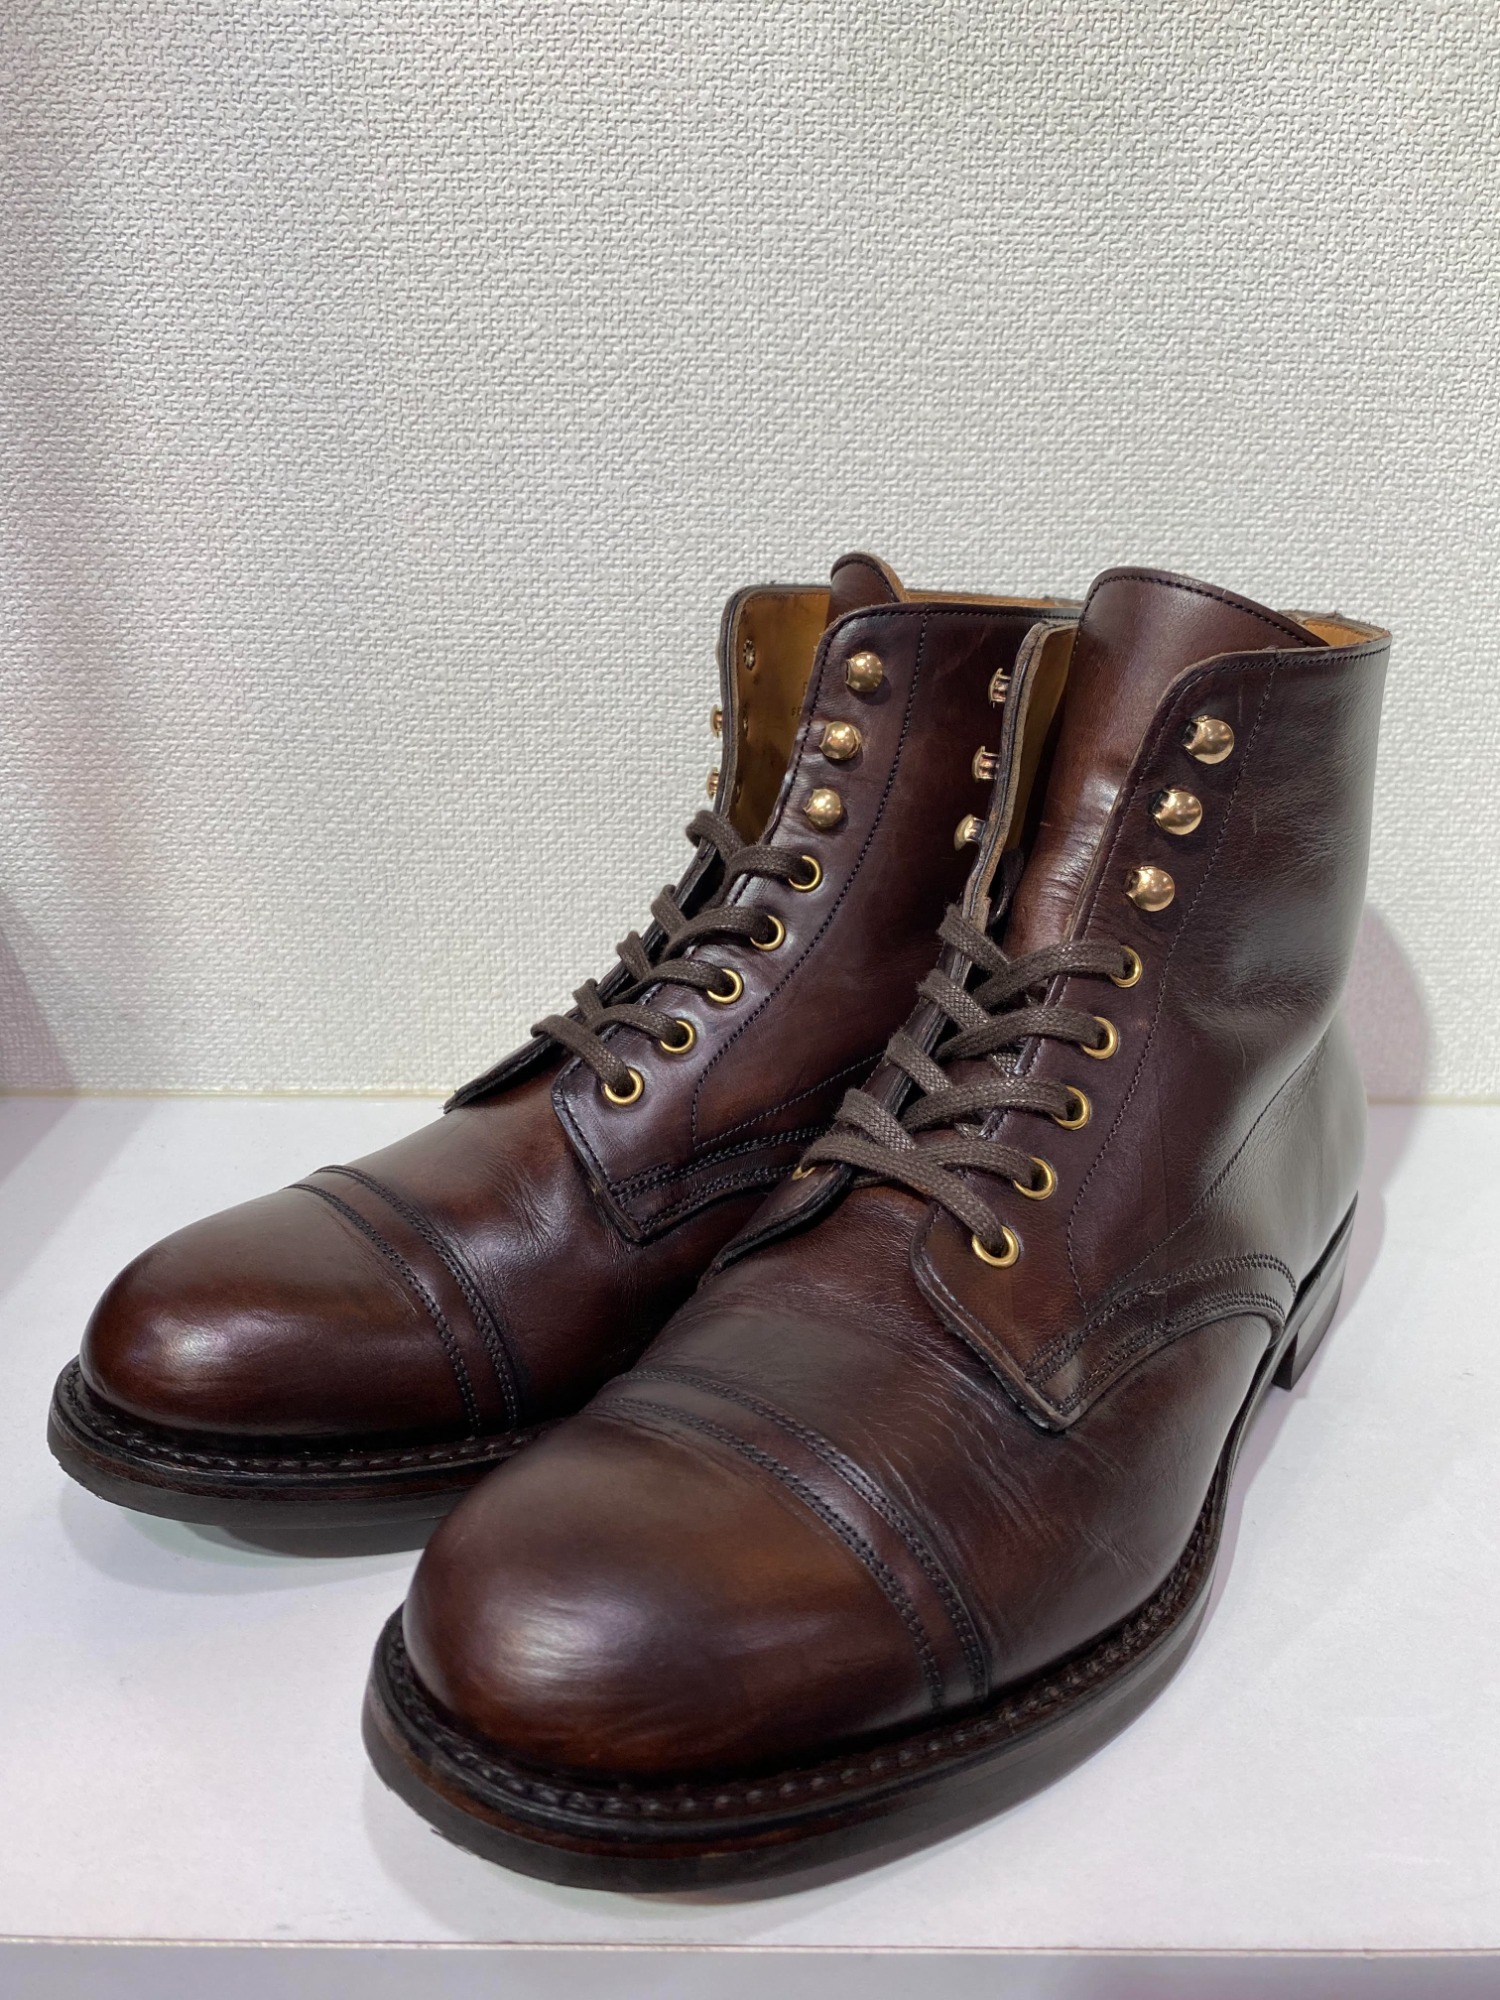 RRL ダブルアールエル Livingstone Leather Boots www.krzysztofbialy.com